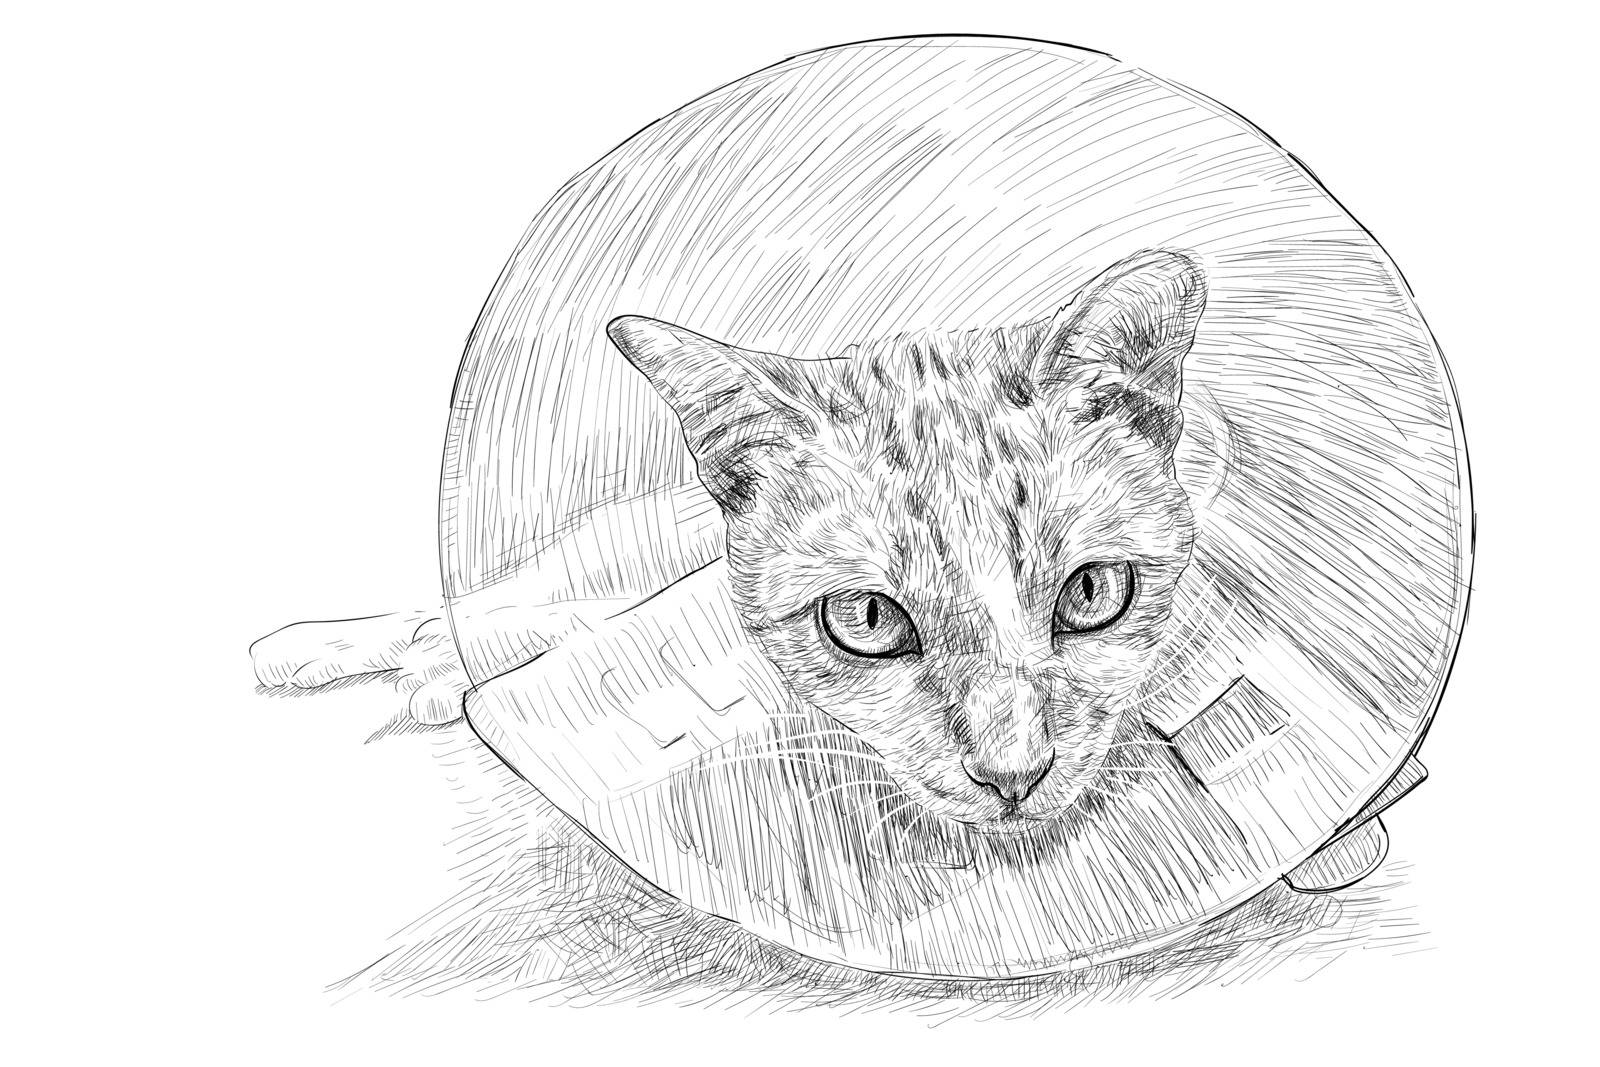 Drawing of a cat wearing a Elizabethan collar prevent scratches and injured bites, stitches, rashes and wounds after sterilization. Vector illustration.